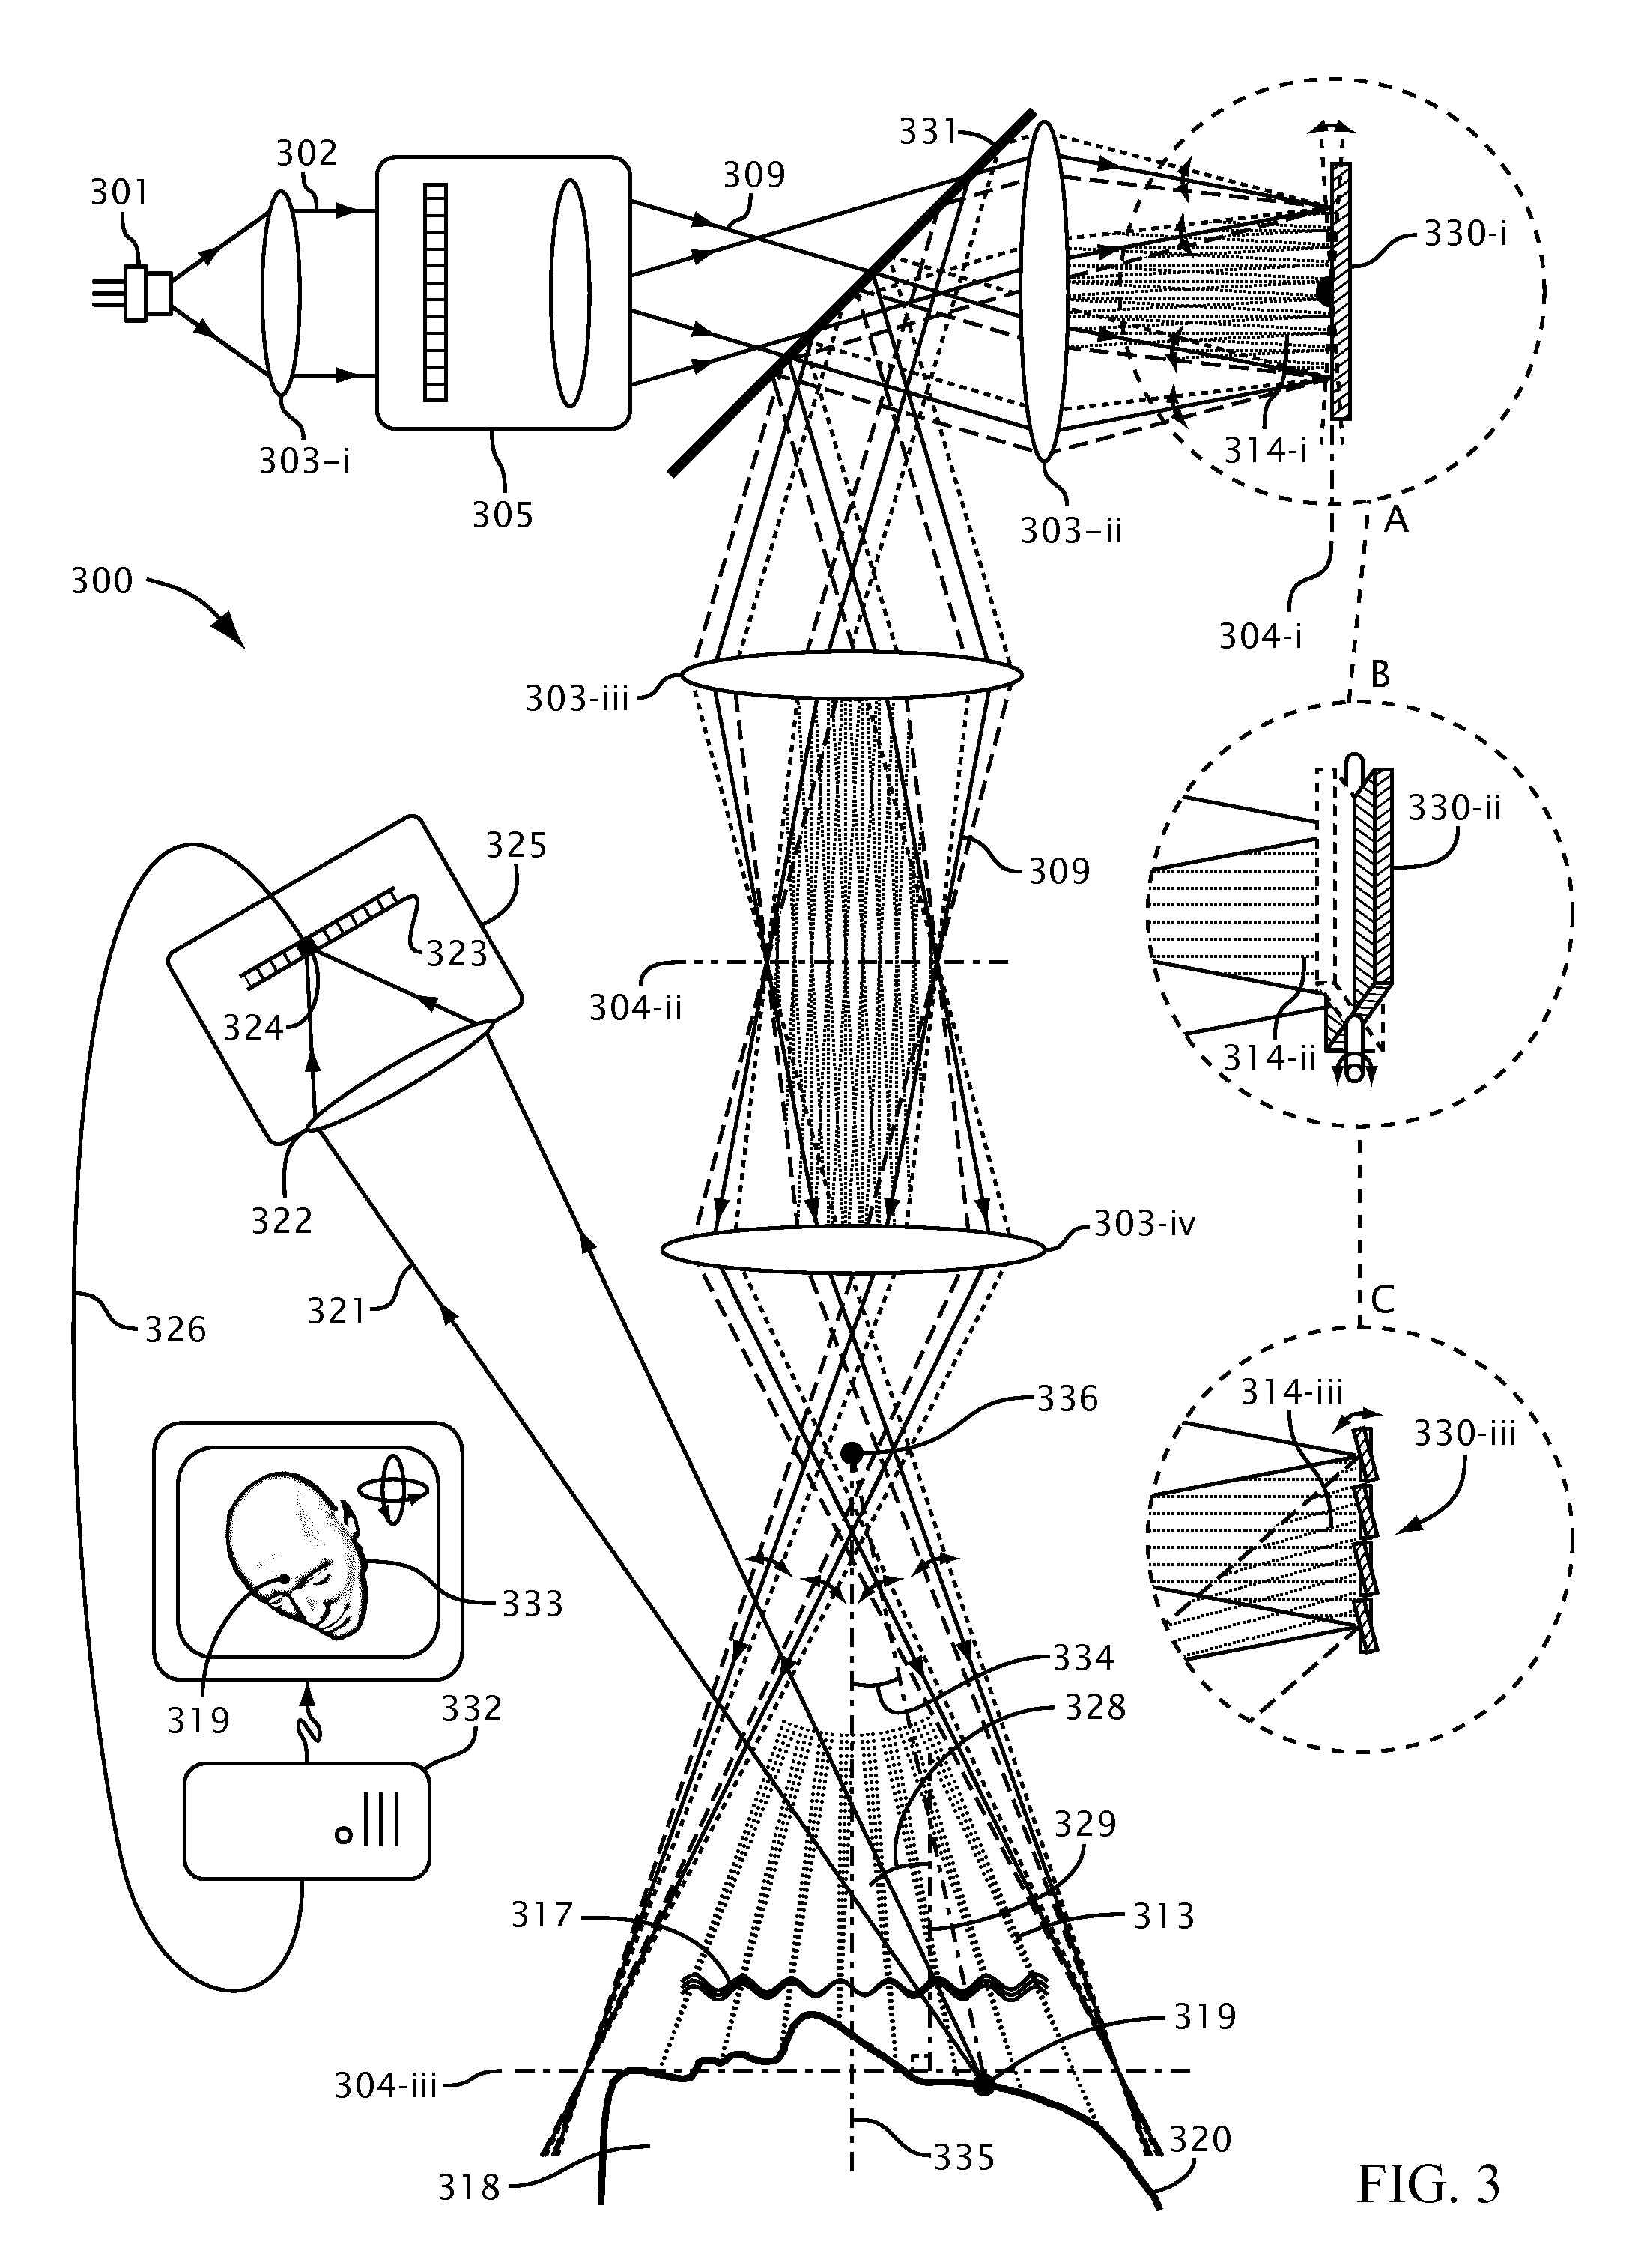 Systems and methods for suppressing coherent structured illumination artifacts